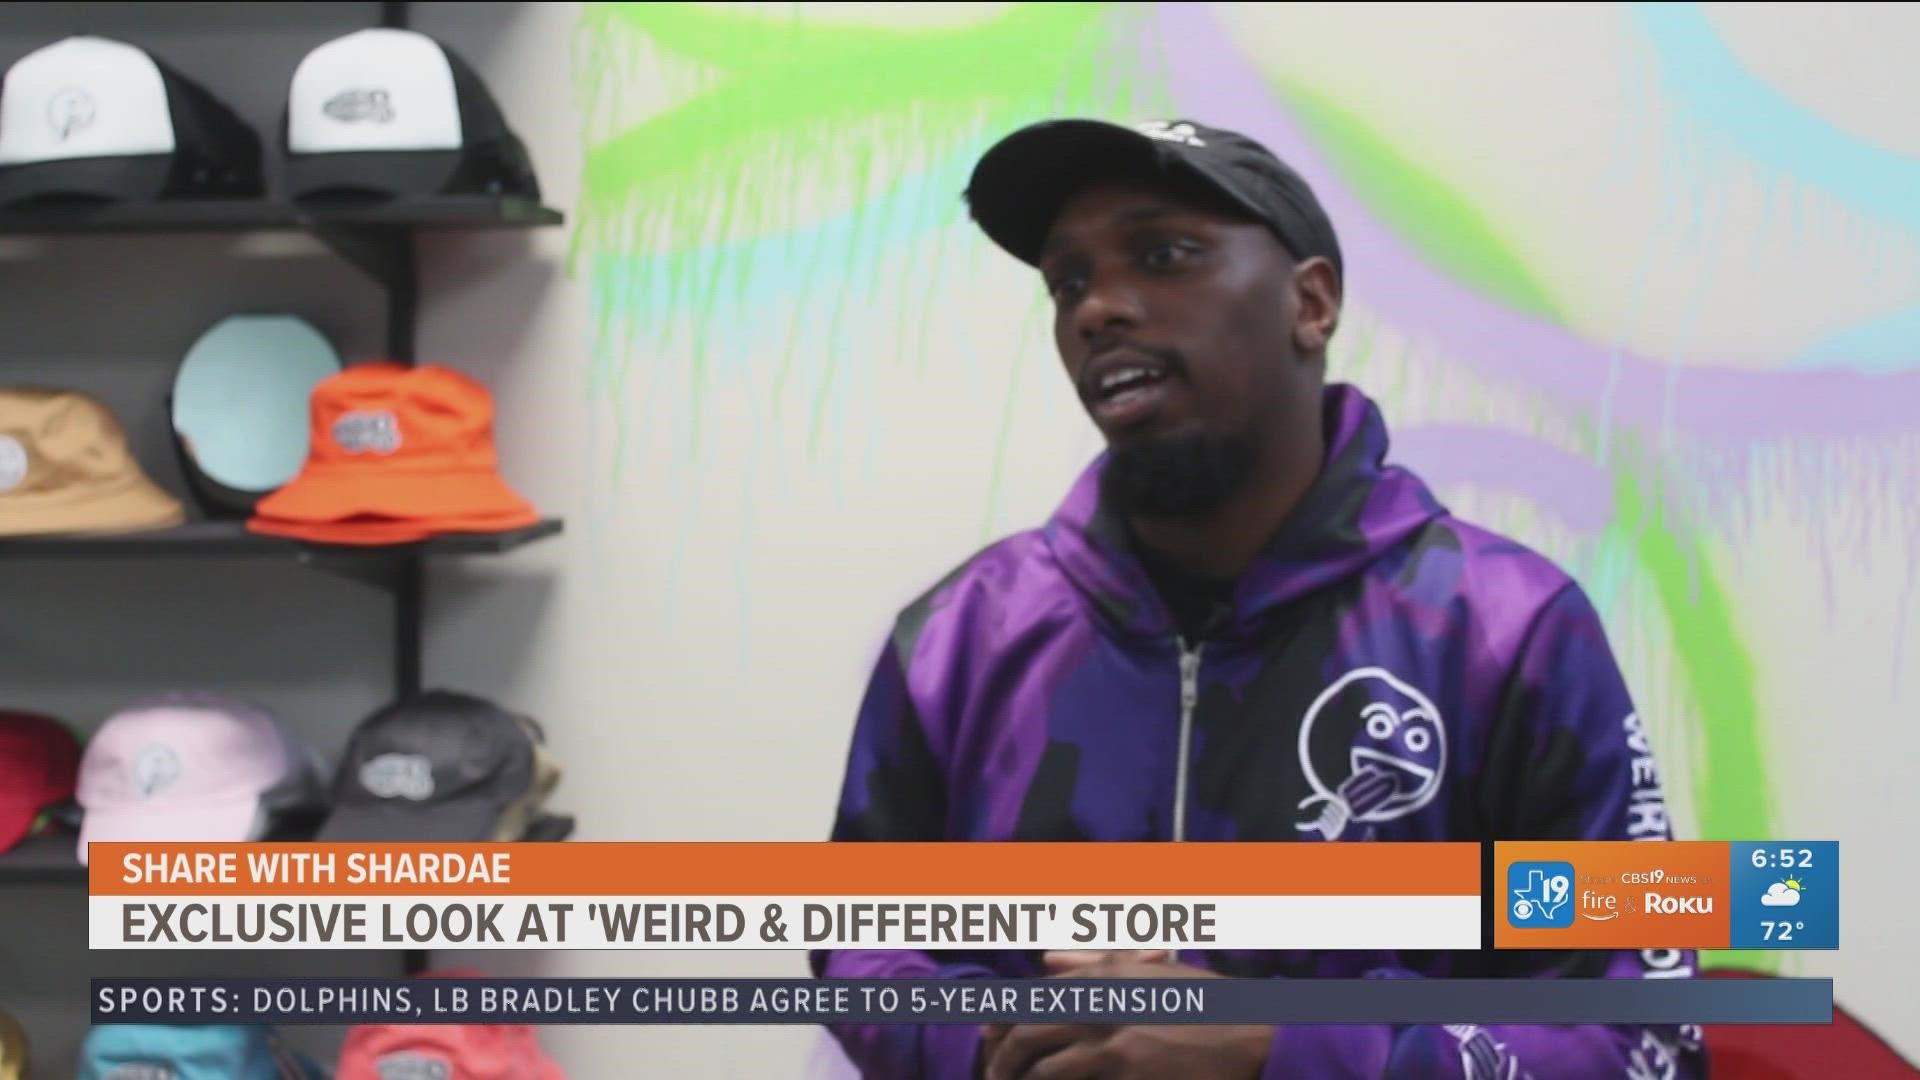 Romereo launched his brand "Weird and Different" and started selling his designs at a kiosk in Broadway Square Mall. Now, he's trading the kiosk for a storefront.